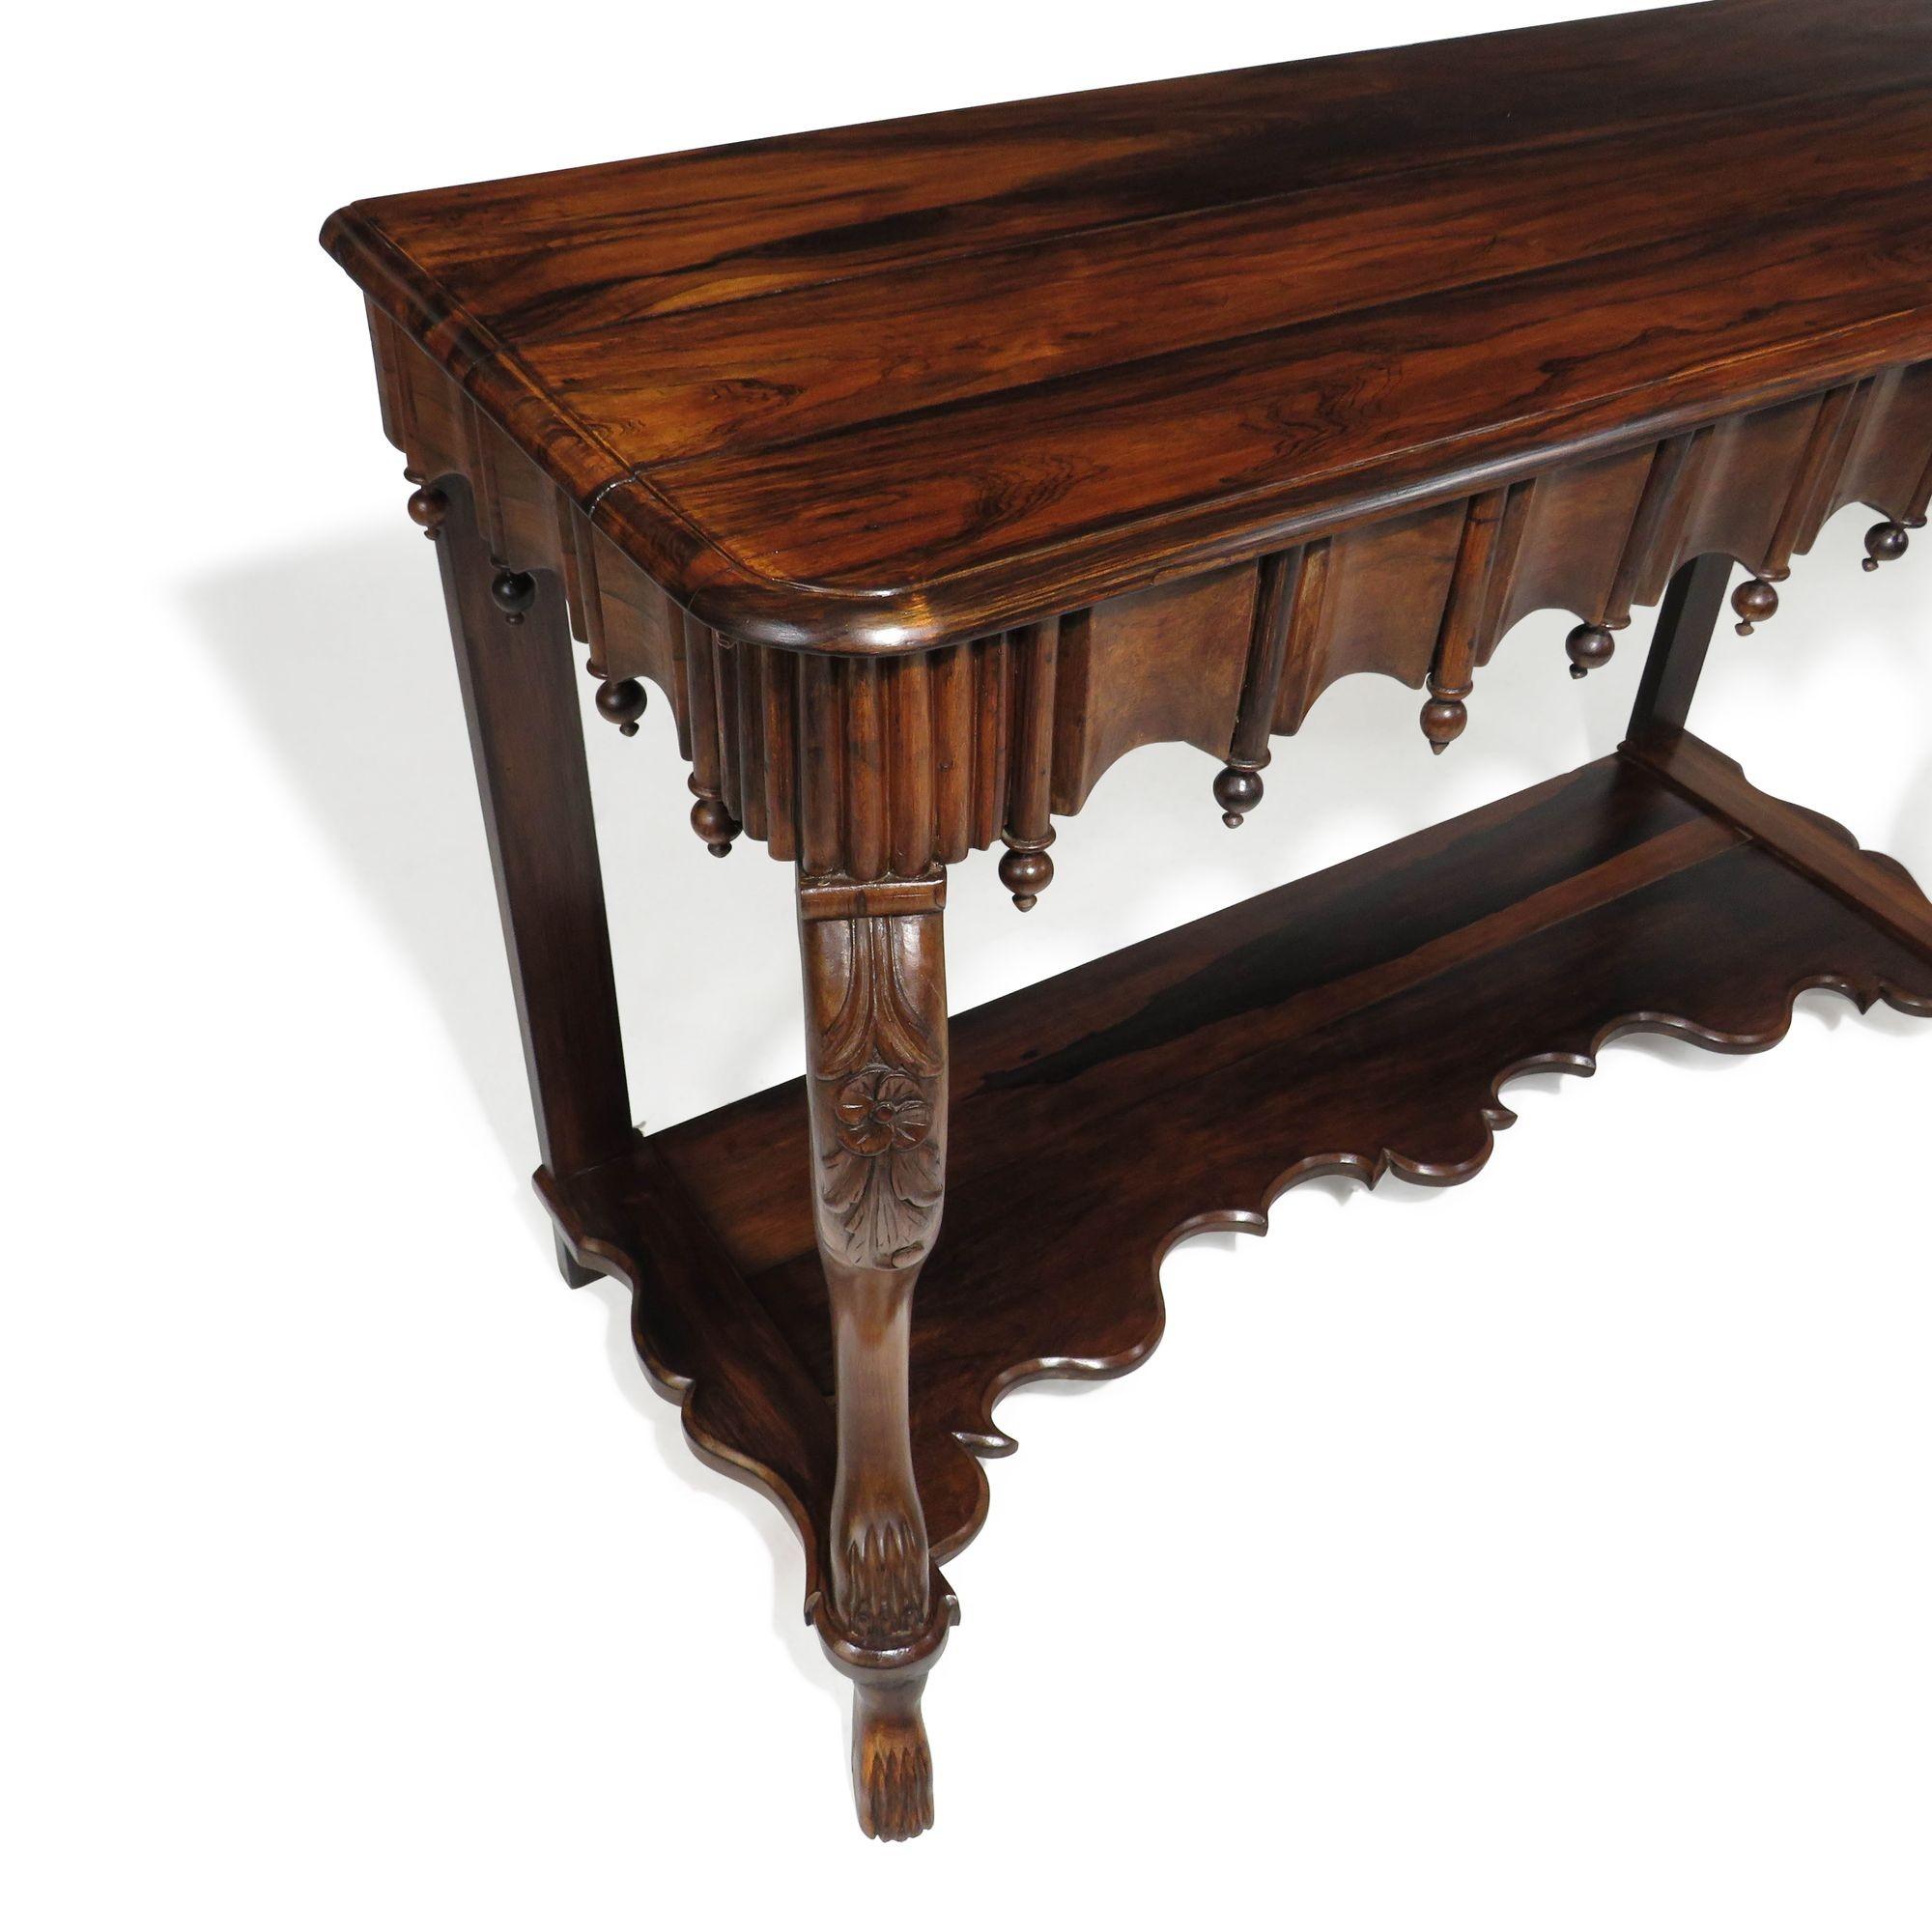 19th c. Gothic Revival Console Table of Solid Brazilian Rosewood In Excellent Condition For Sale In Oakland, CA